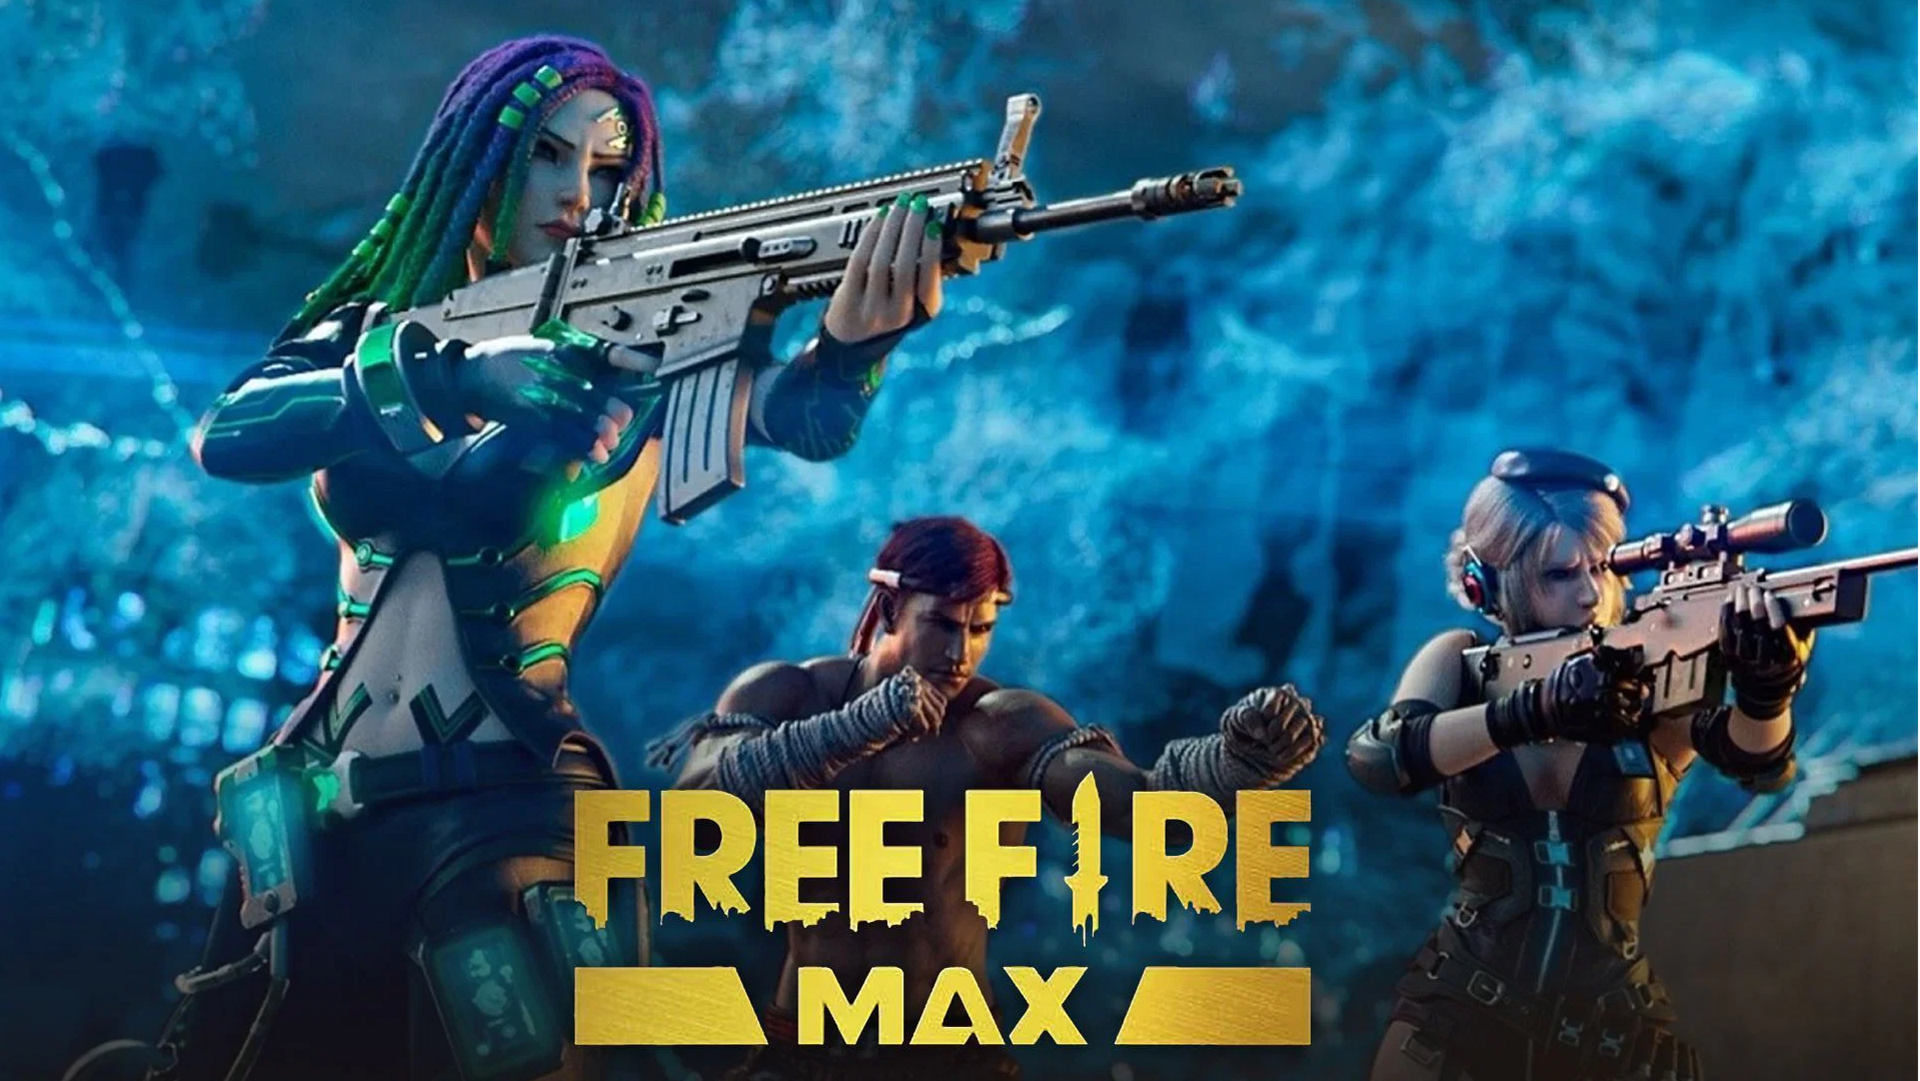 Garena Free Fire MAX codes for December 8 now available